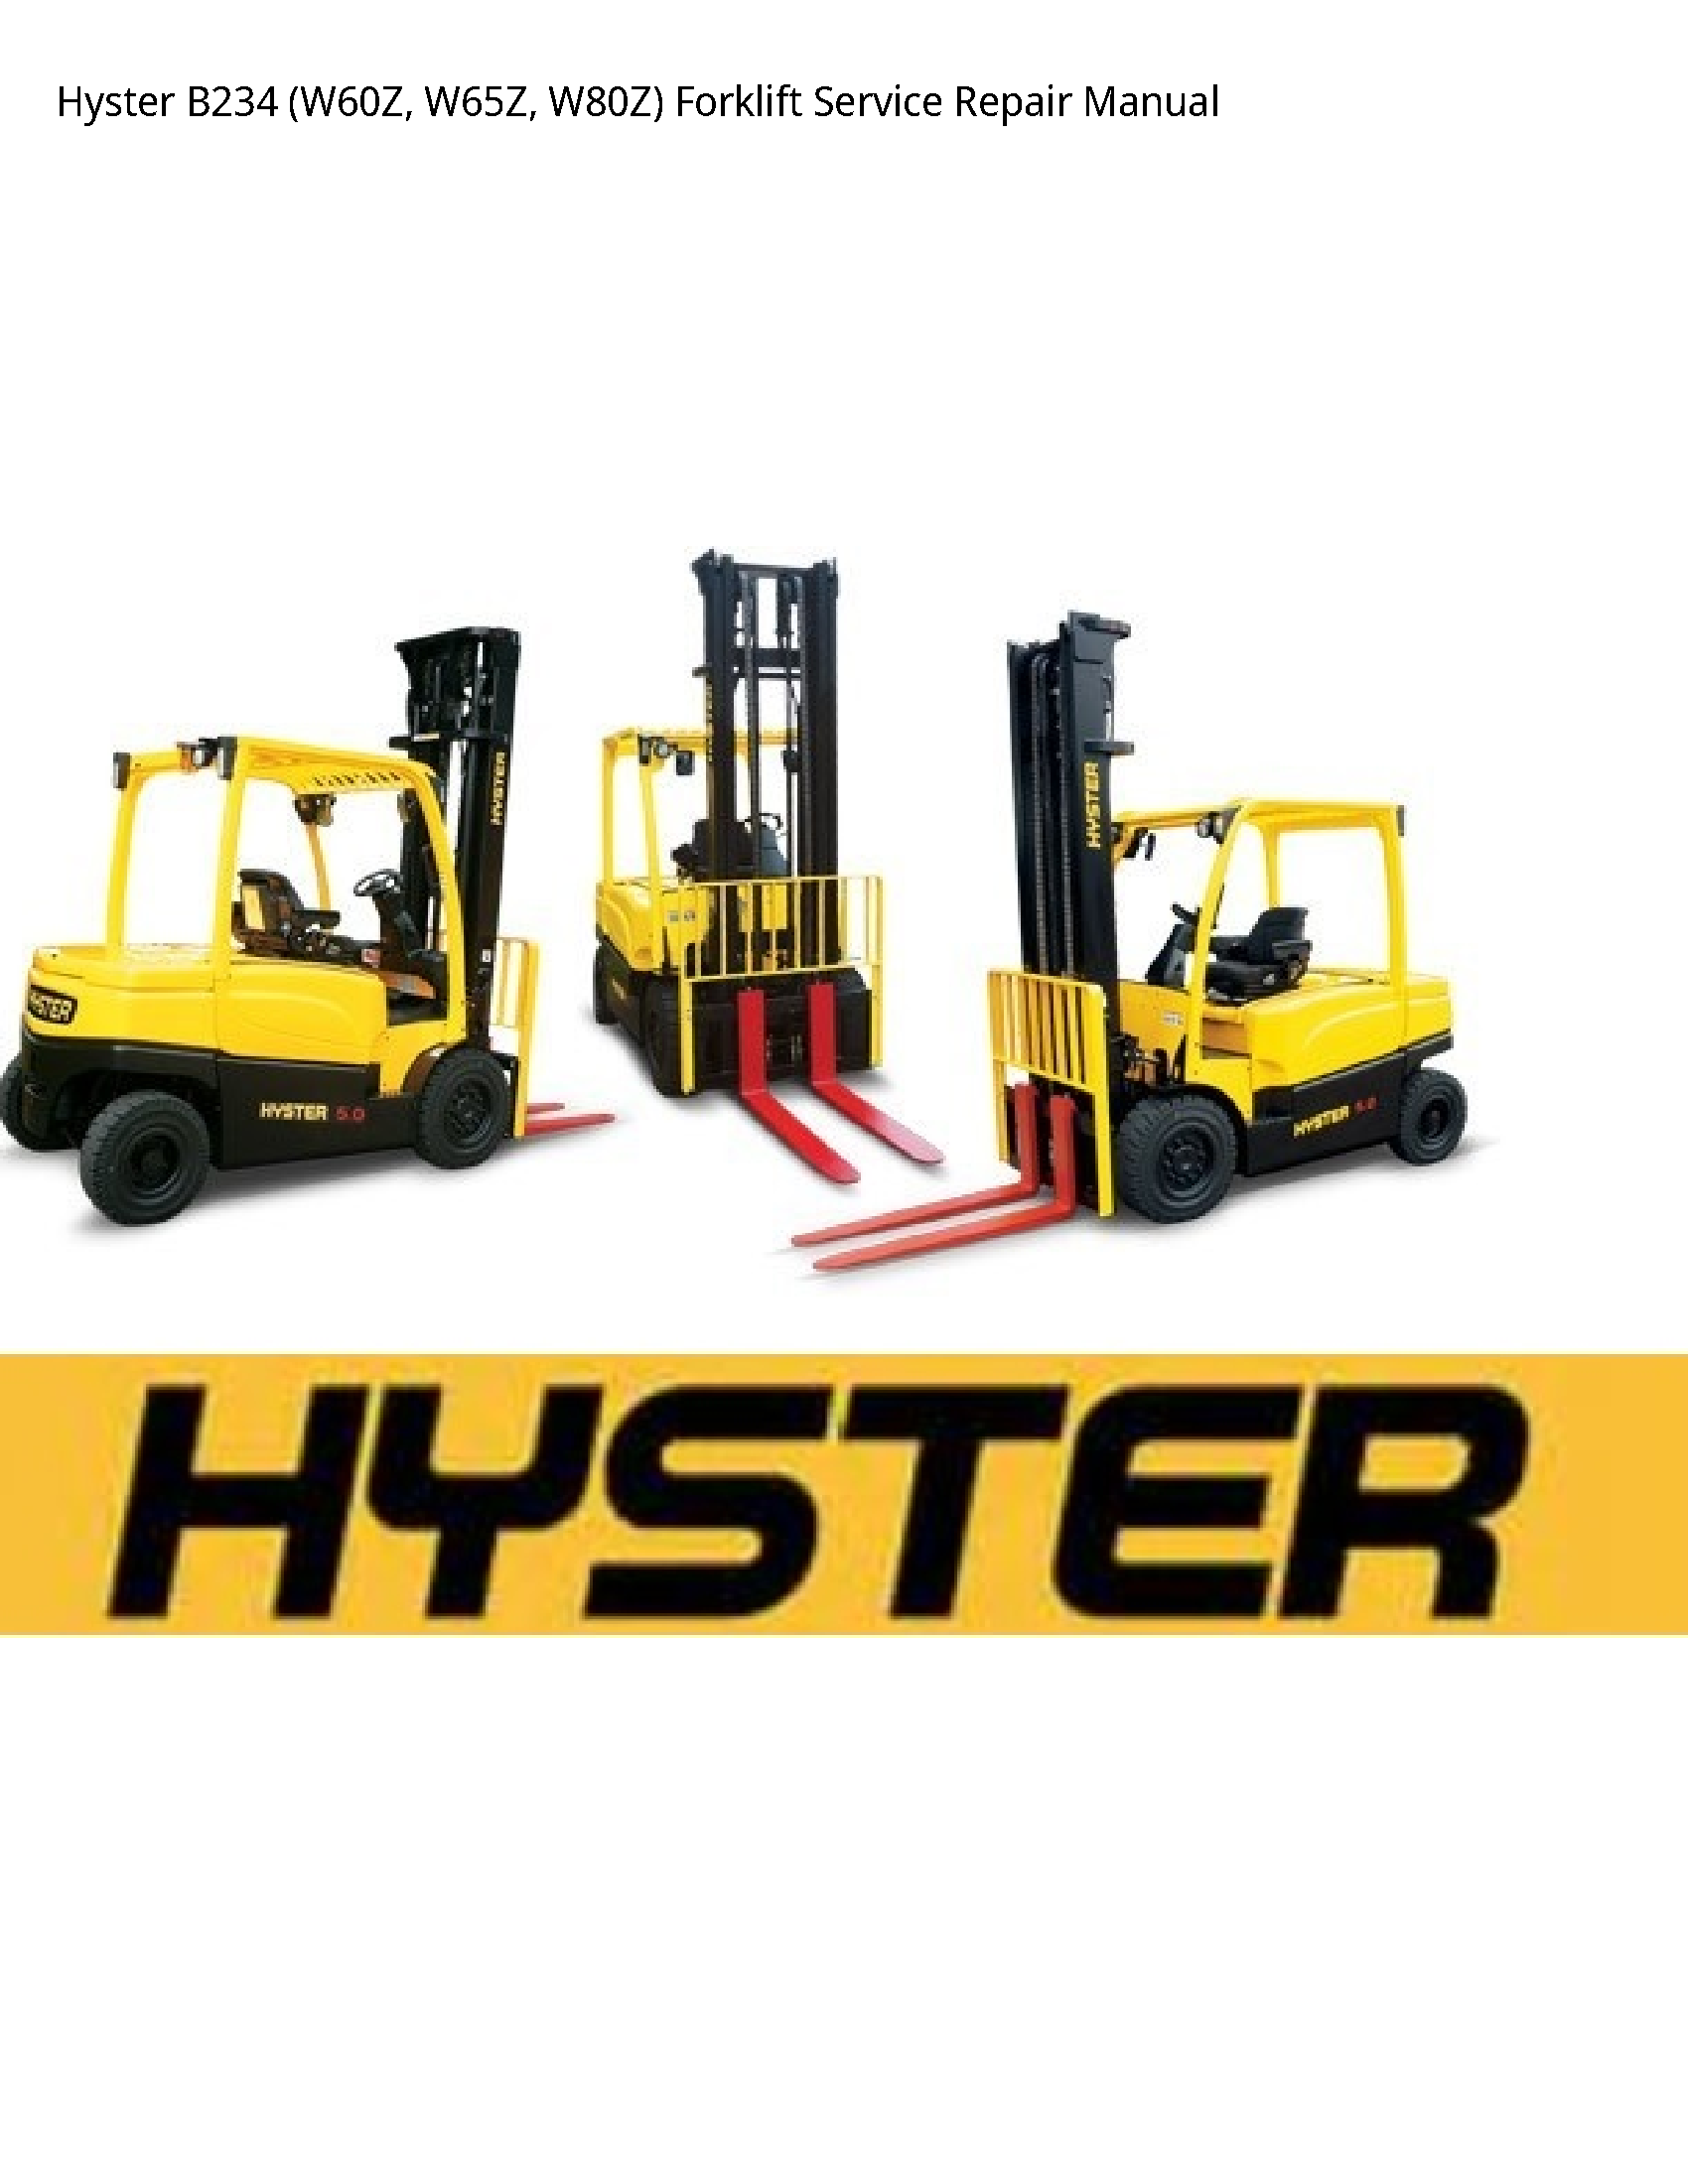 Hyster B234 Forklift manual